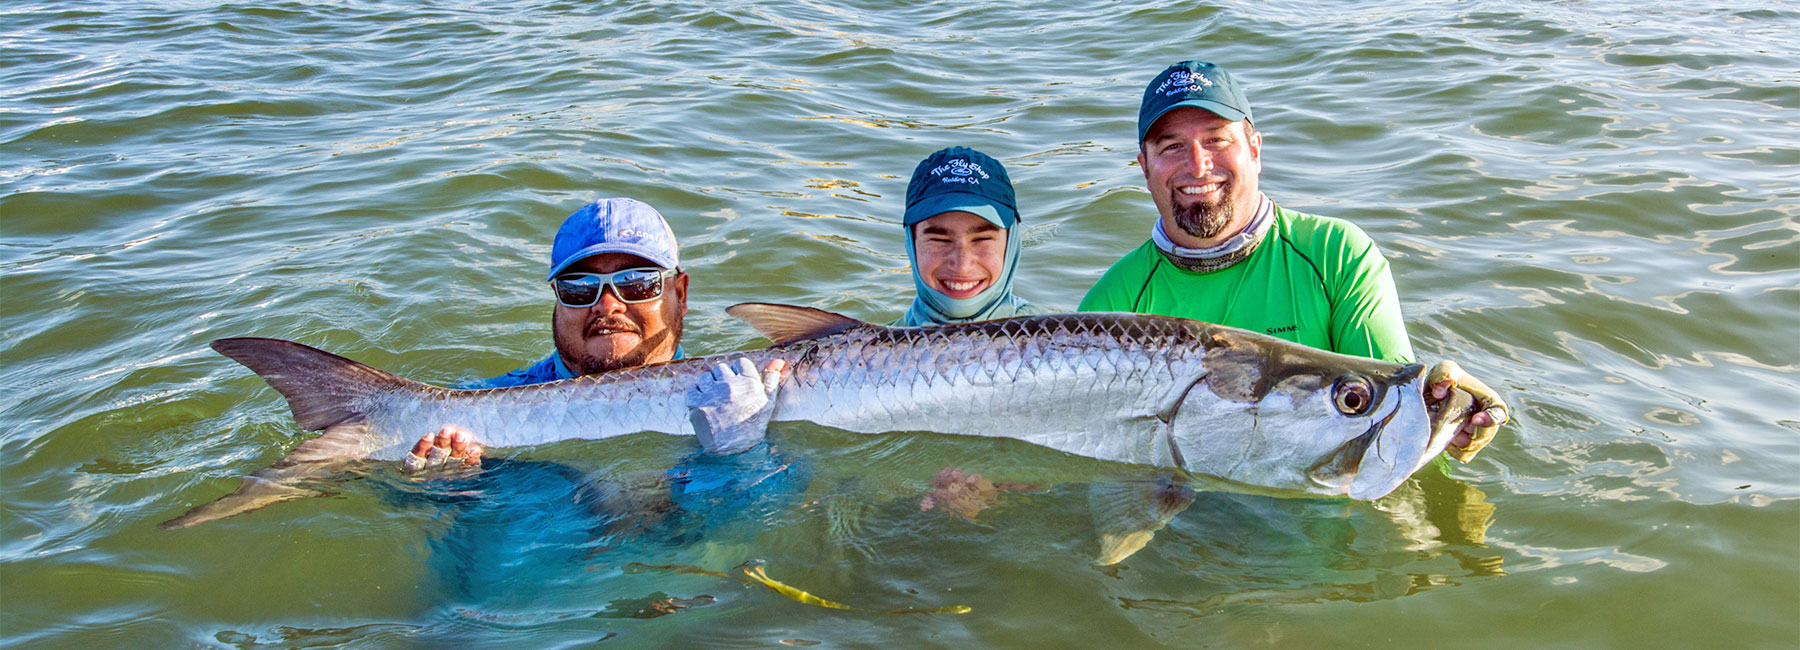 Michael & Mitchell Caranci in Belize holding a large tarpon